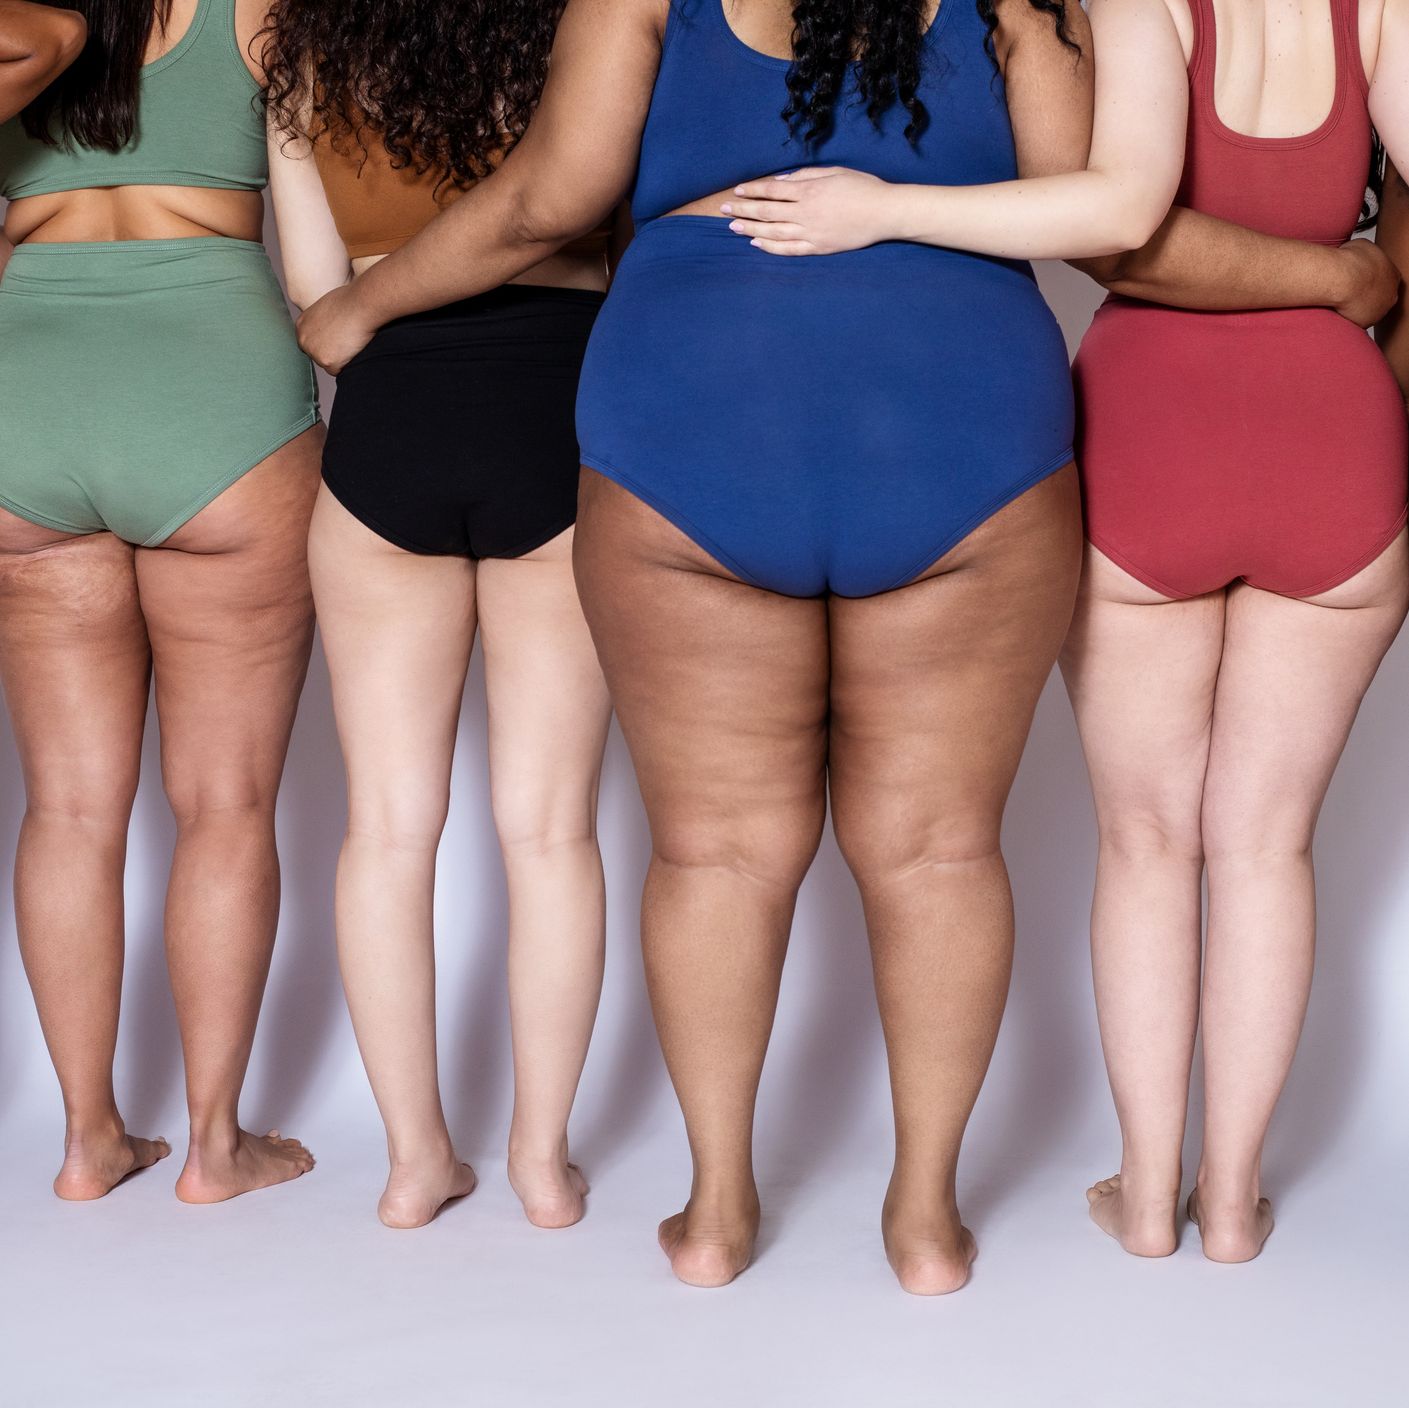 The Results of Our 2022 Body Image Survey Are In